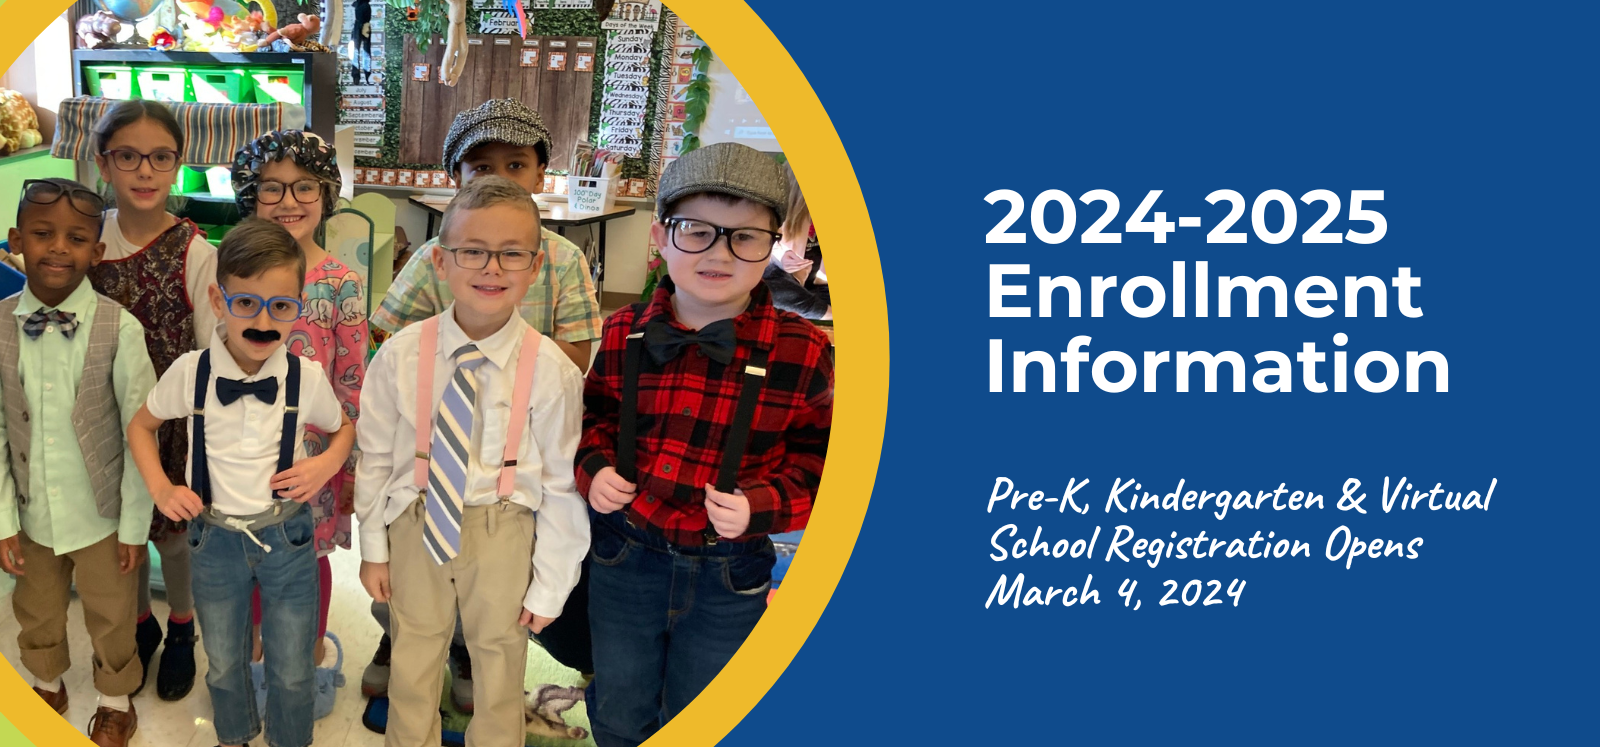 image of 2024-2025 enrollment information featuring students in classroom